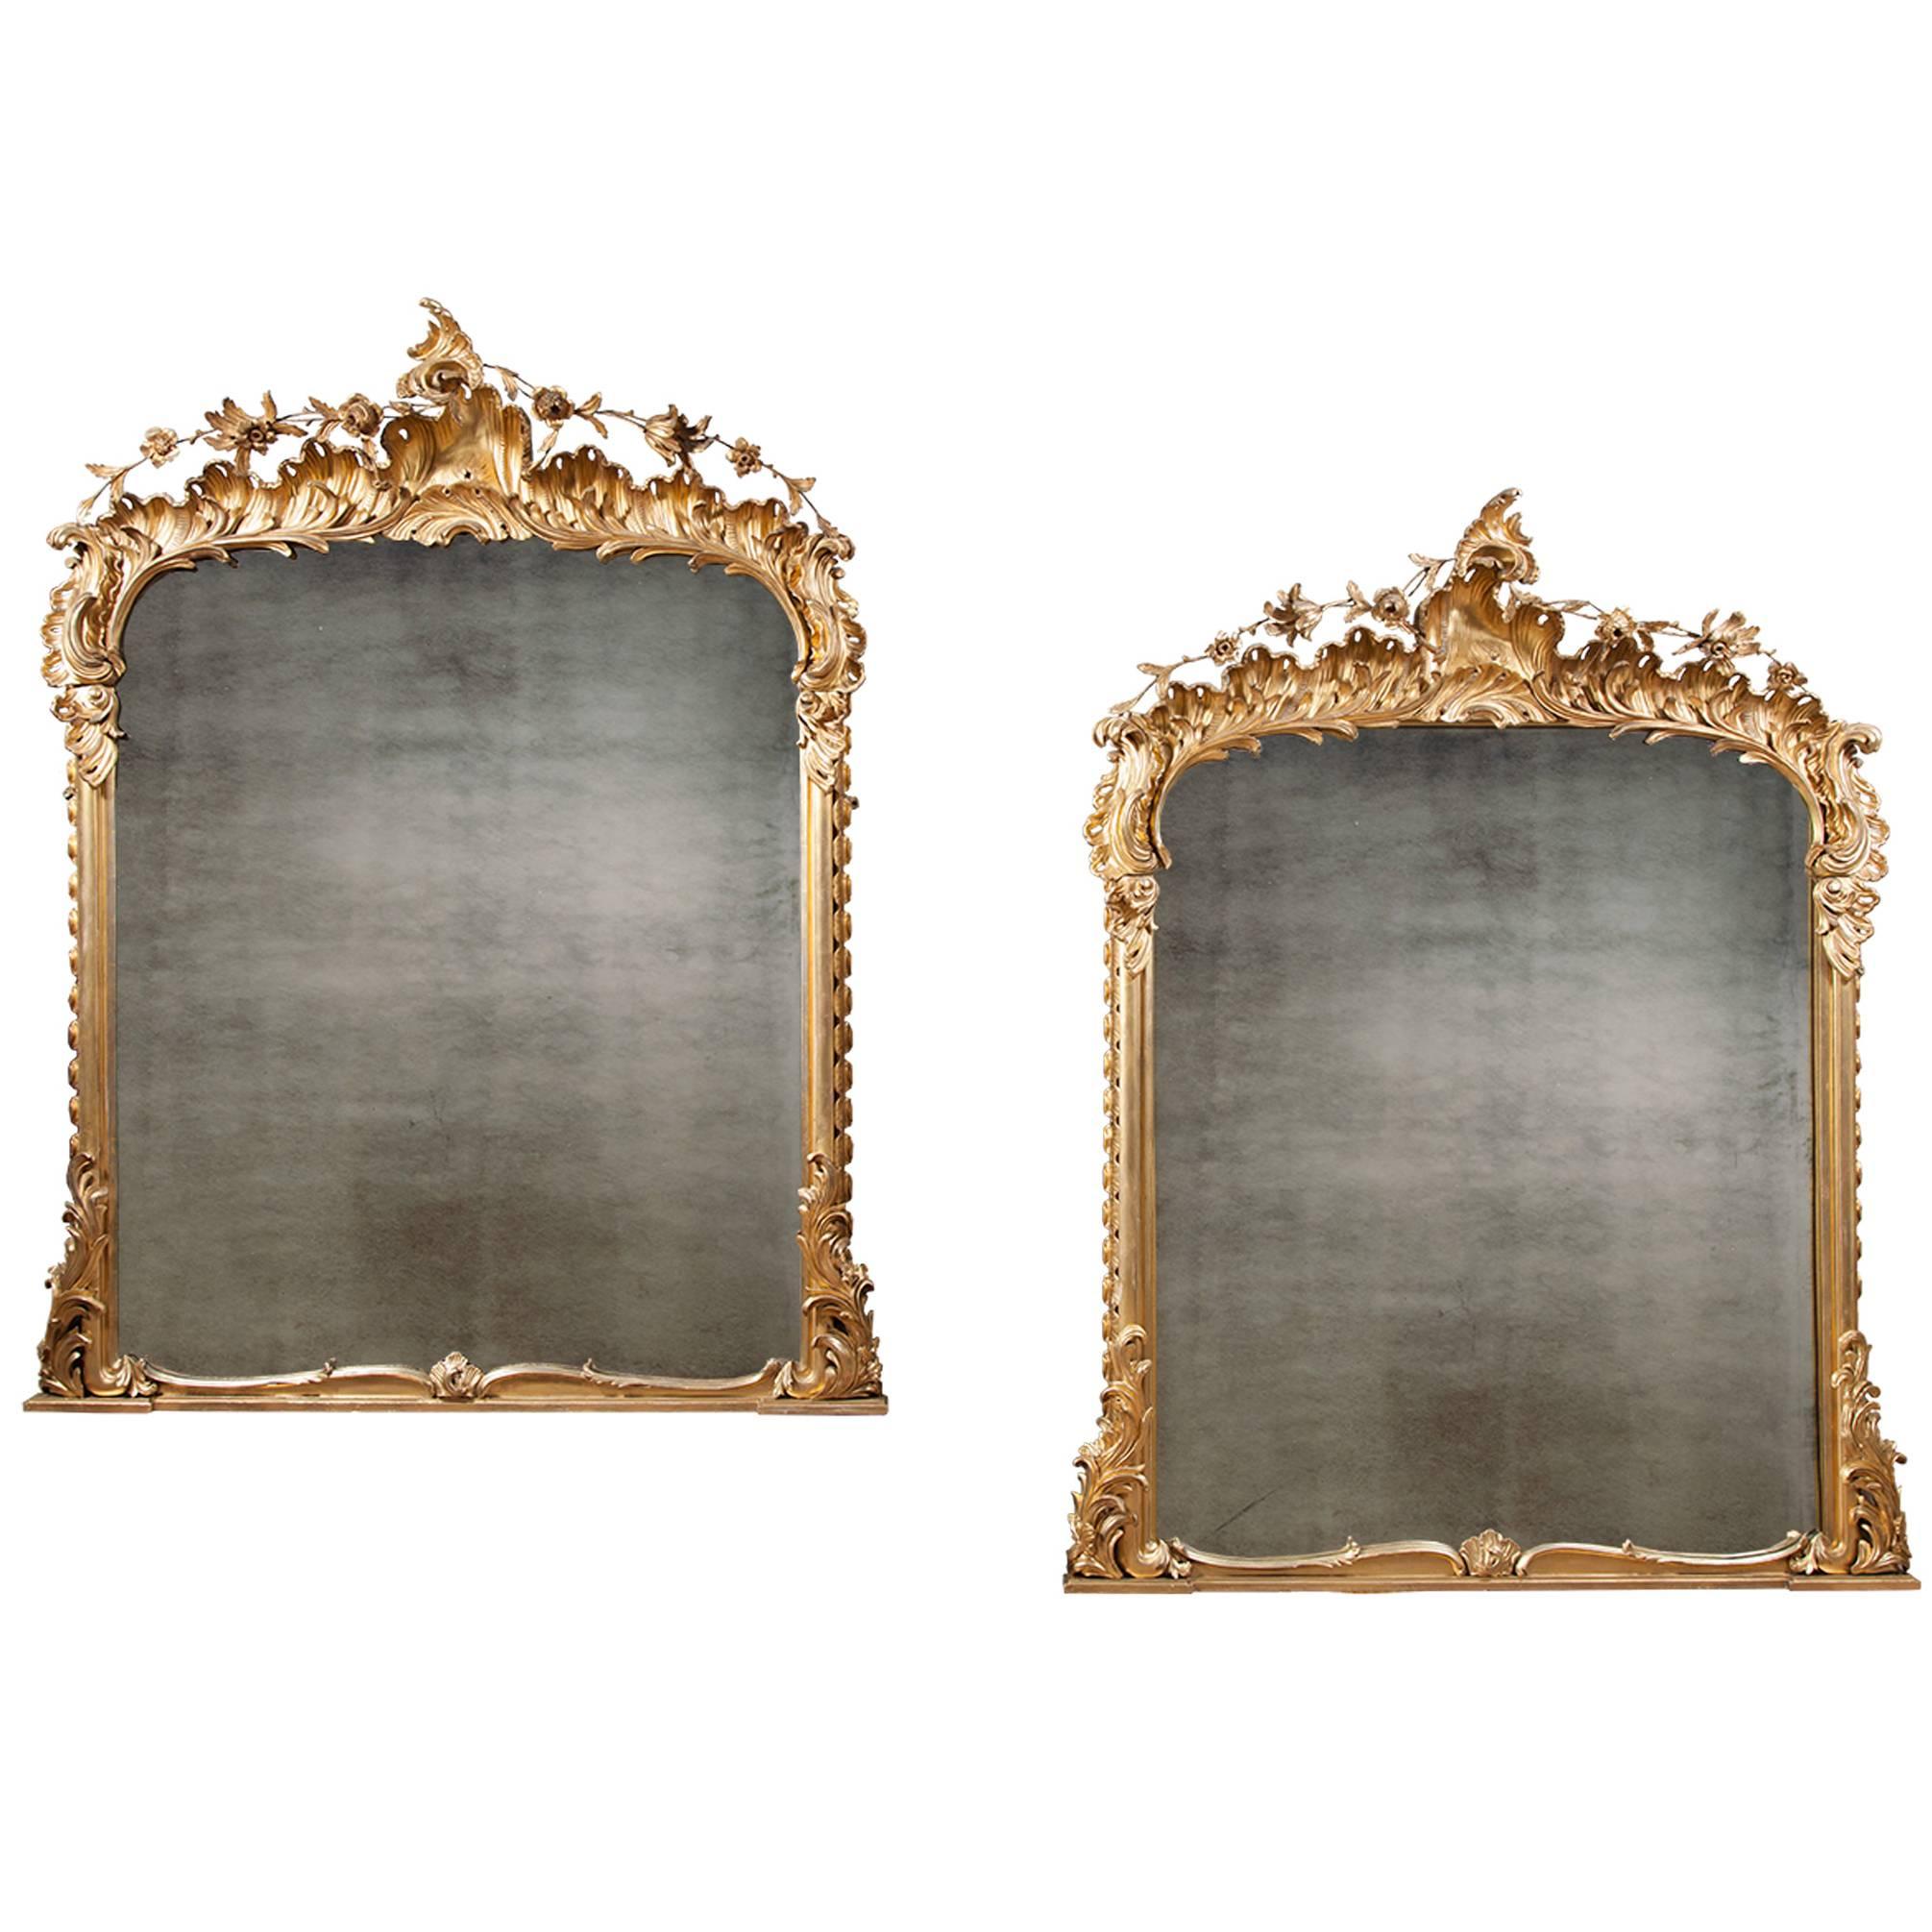 Pair of Irish Antique Carved Giltwood Overmantel Mirrors